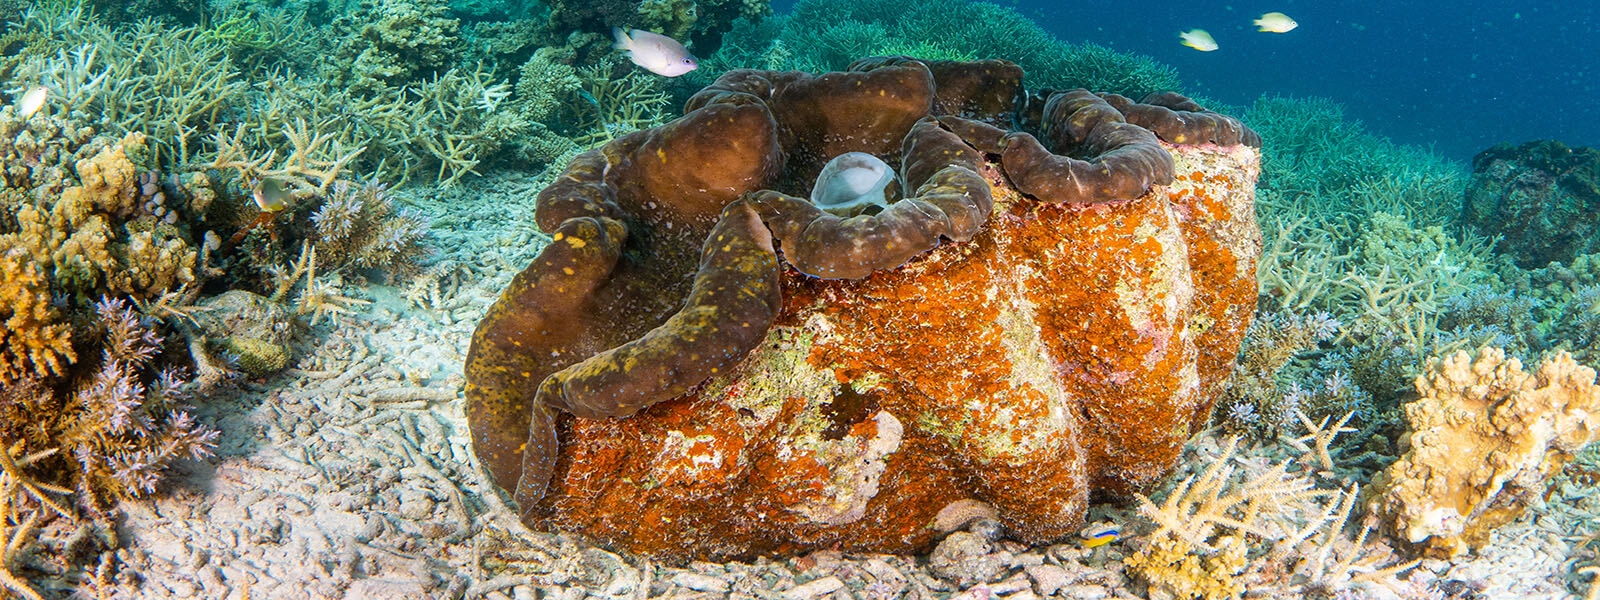 We see giant clams like this on our coral triangle adventures Palau snorkeling tour